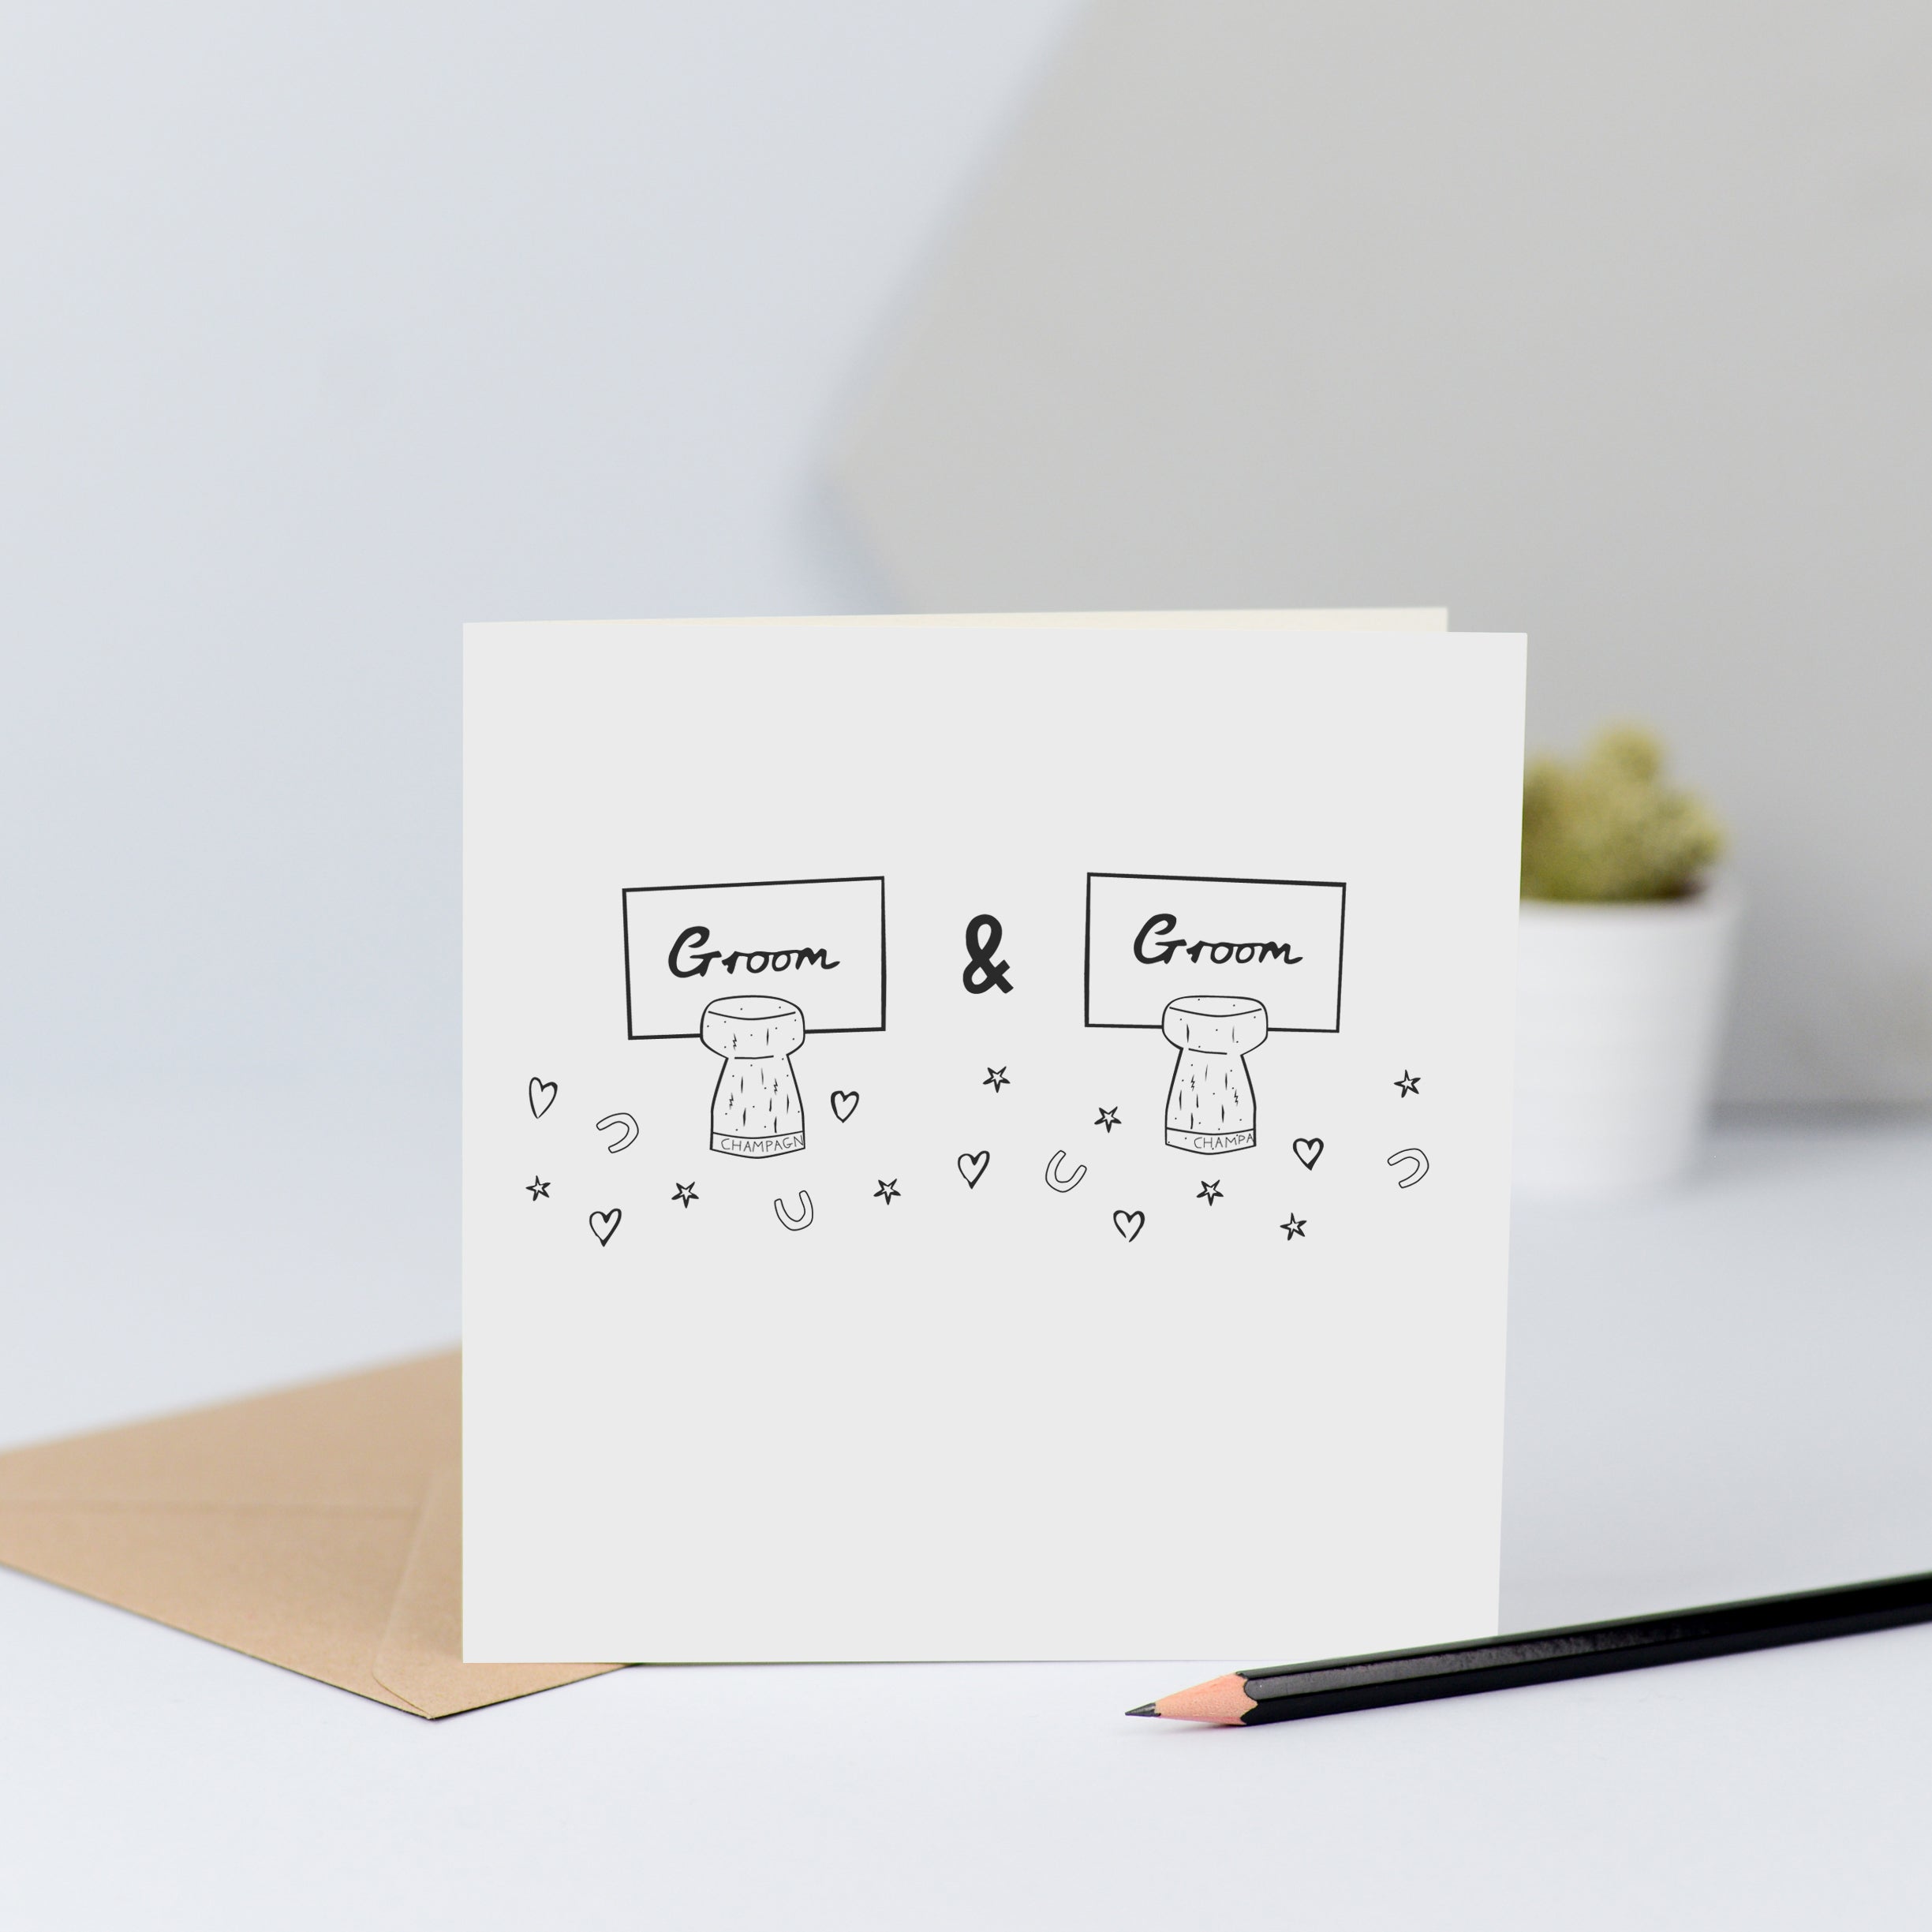 A same sex wedding card with two "Groom" name places.